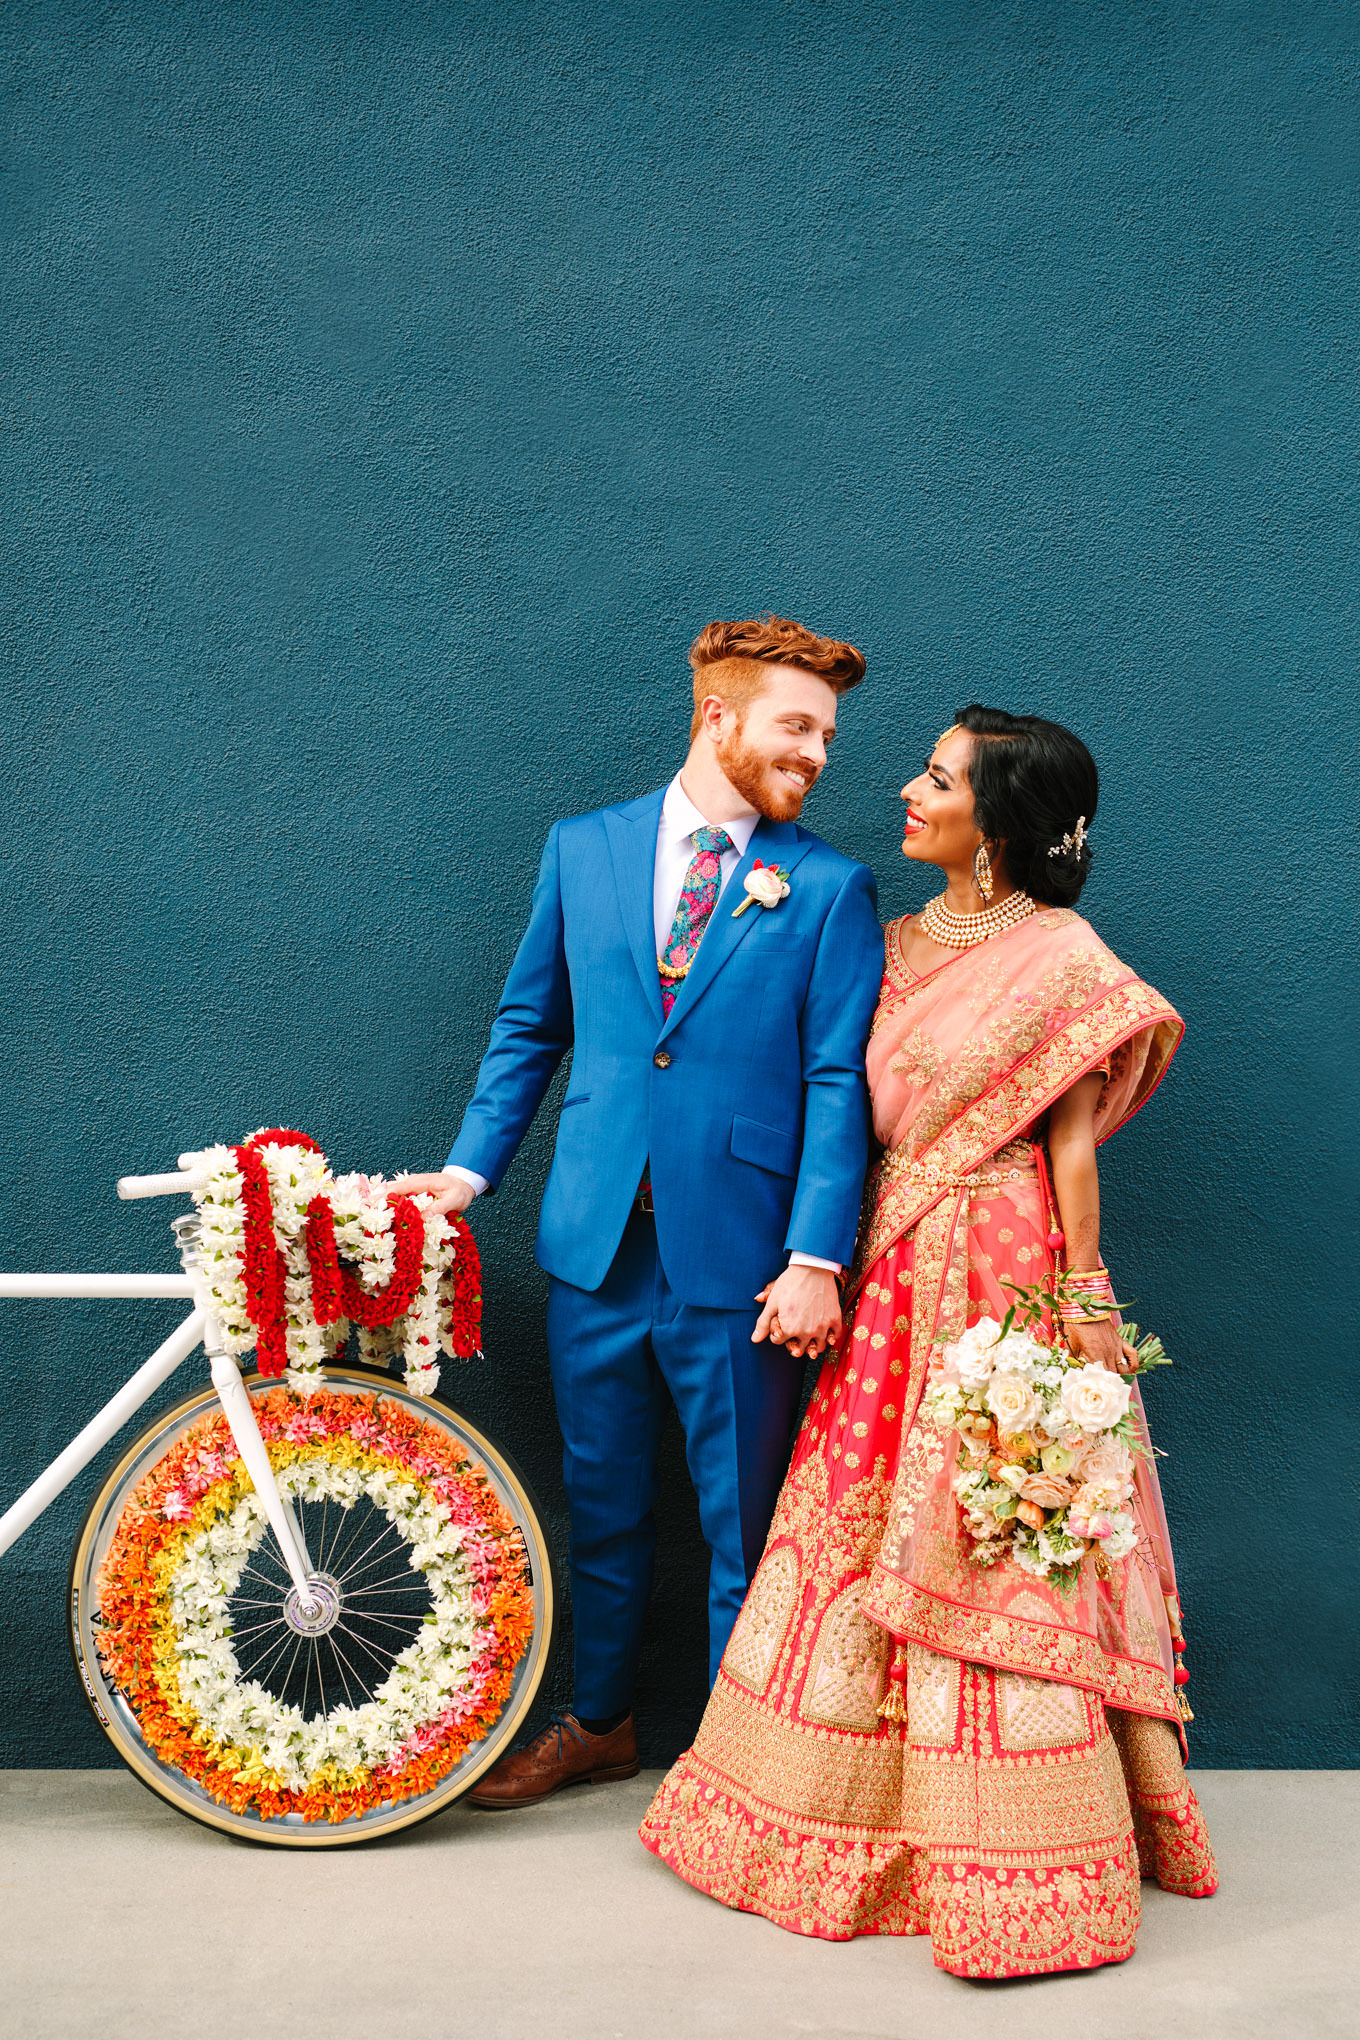 Bride in red saree and groom in bright blue suit with floral Baraat bicycle on teal wall. Two Disney artists create a unique and colorful Indian Fusion wedding at The Fig House Los Angeles, featured on Green Wedding Shoes. | Colorful and elevated wedding inspiration for fun-loving couples in Southern California | #indianwedding #indianfusionwedding #thefighouse #losangeleswedding   Source: Mary Costa Photography | Los Angeles